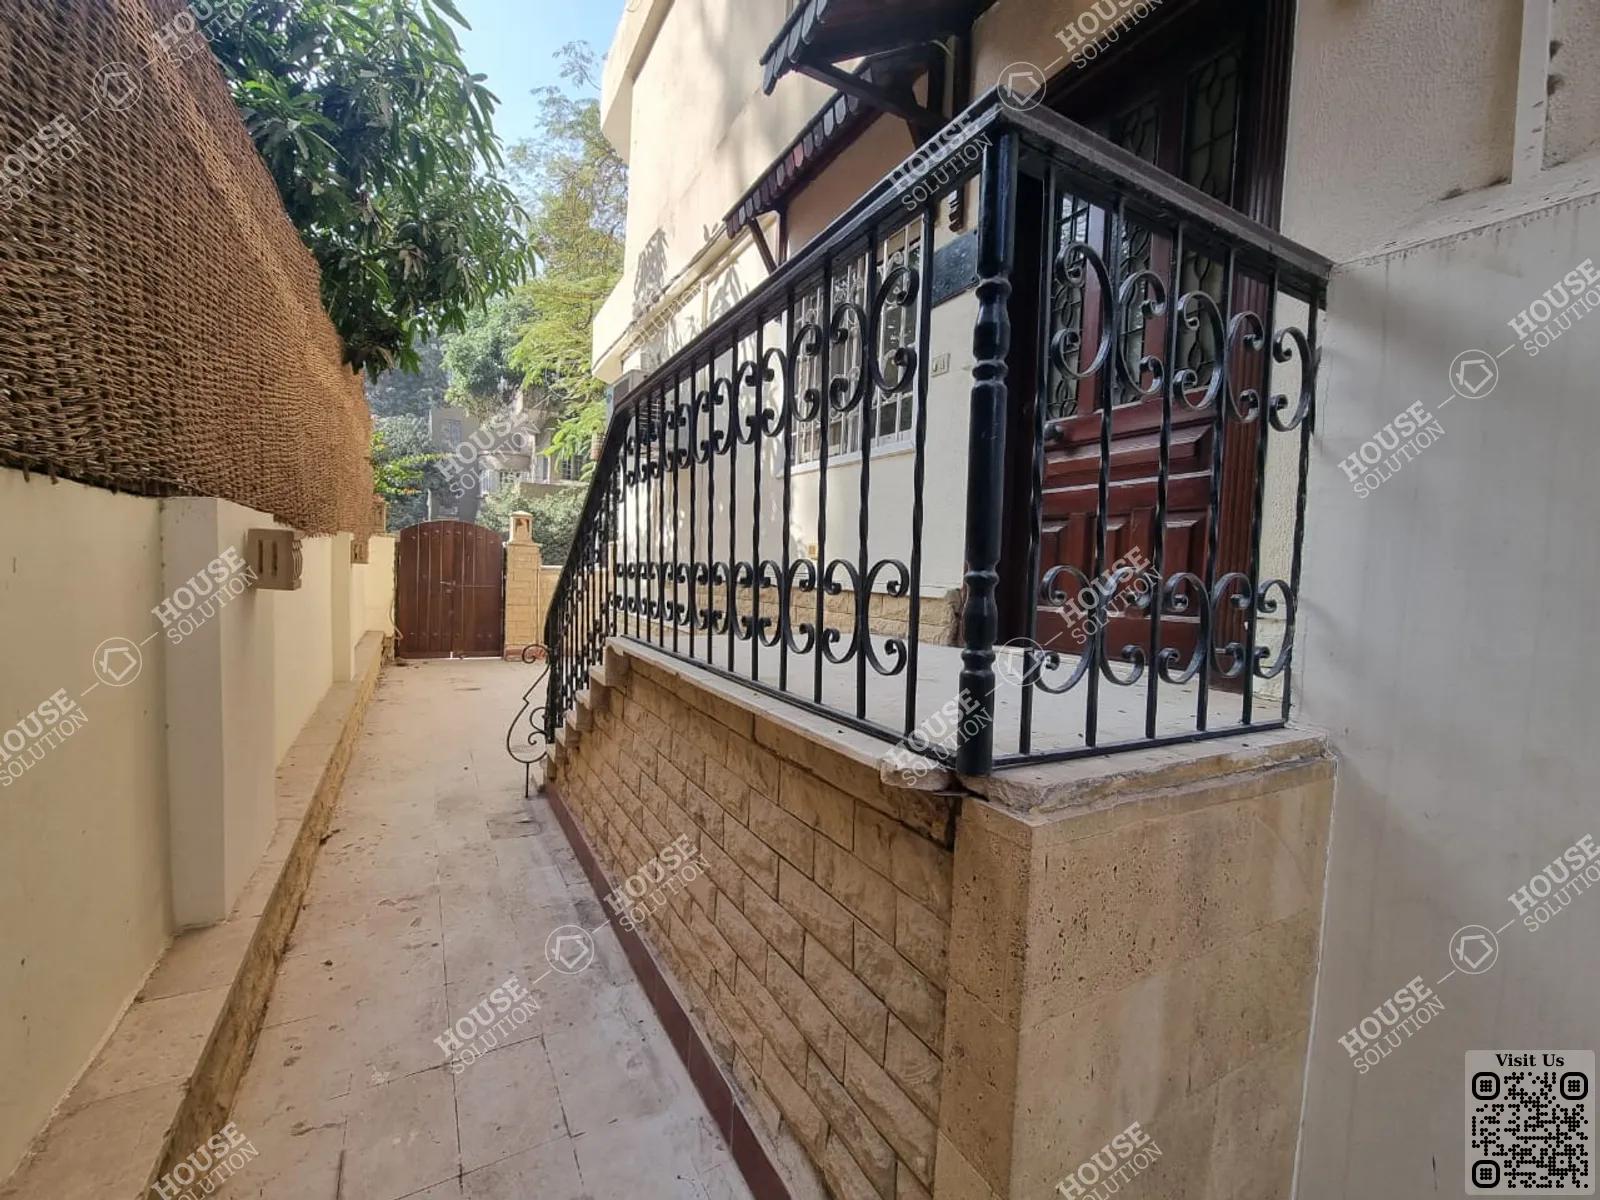 PRIVATE ENTRANCE  @ Office spaces For Rent In Maadi Maadi Sarayat Area: 185 m² consists of 3 Bedrooms 2 Bathrooms Semi furnished 5 stars #5793-1